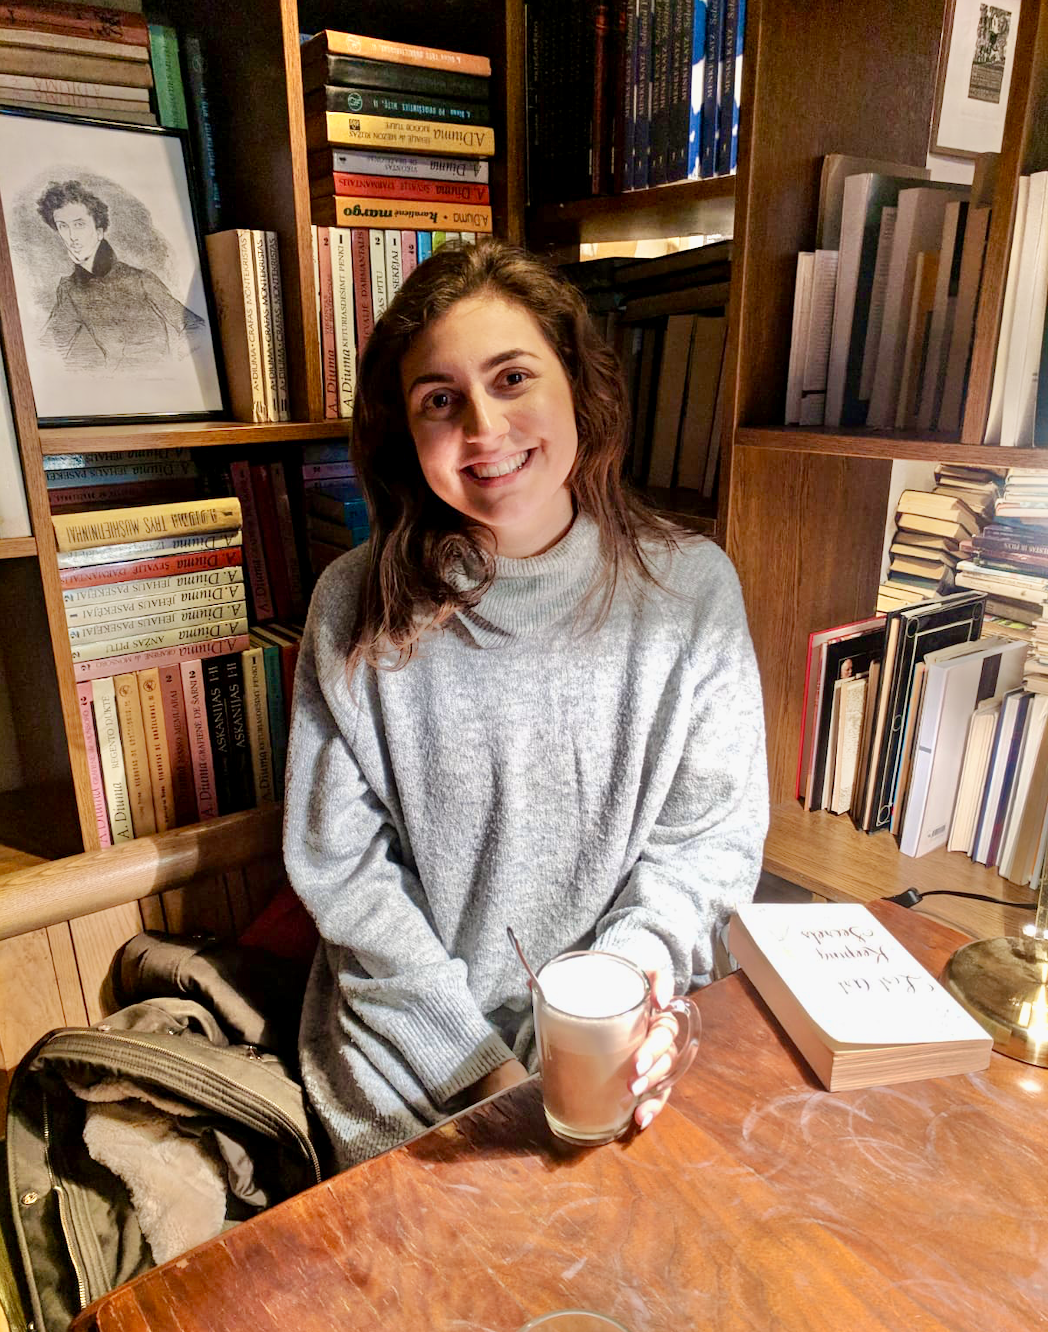 Best Restaurants in Vilnius: Nell sat in a cafe surrounded by shelves of books with a coffee in her hand. She's looking at the camera and smiling